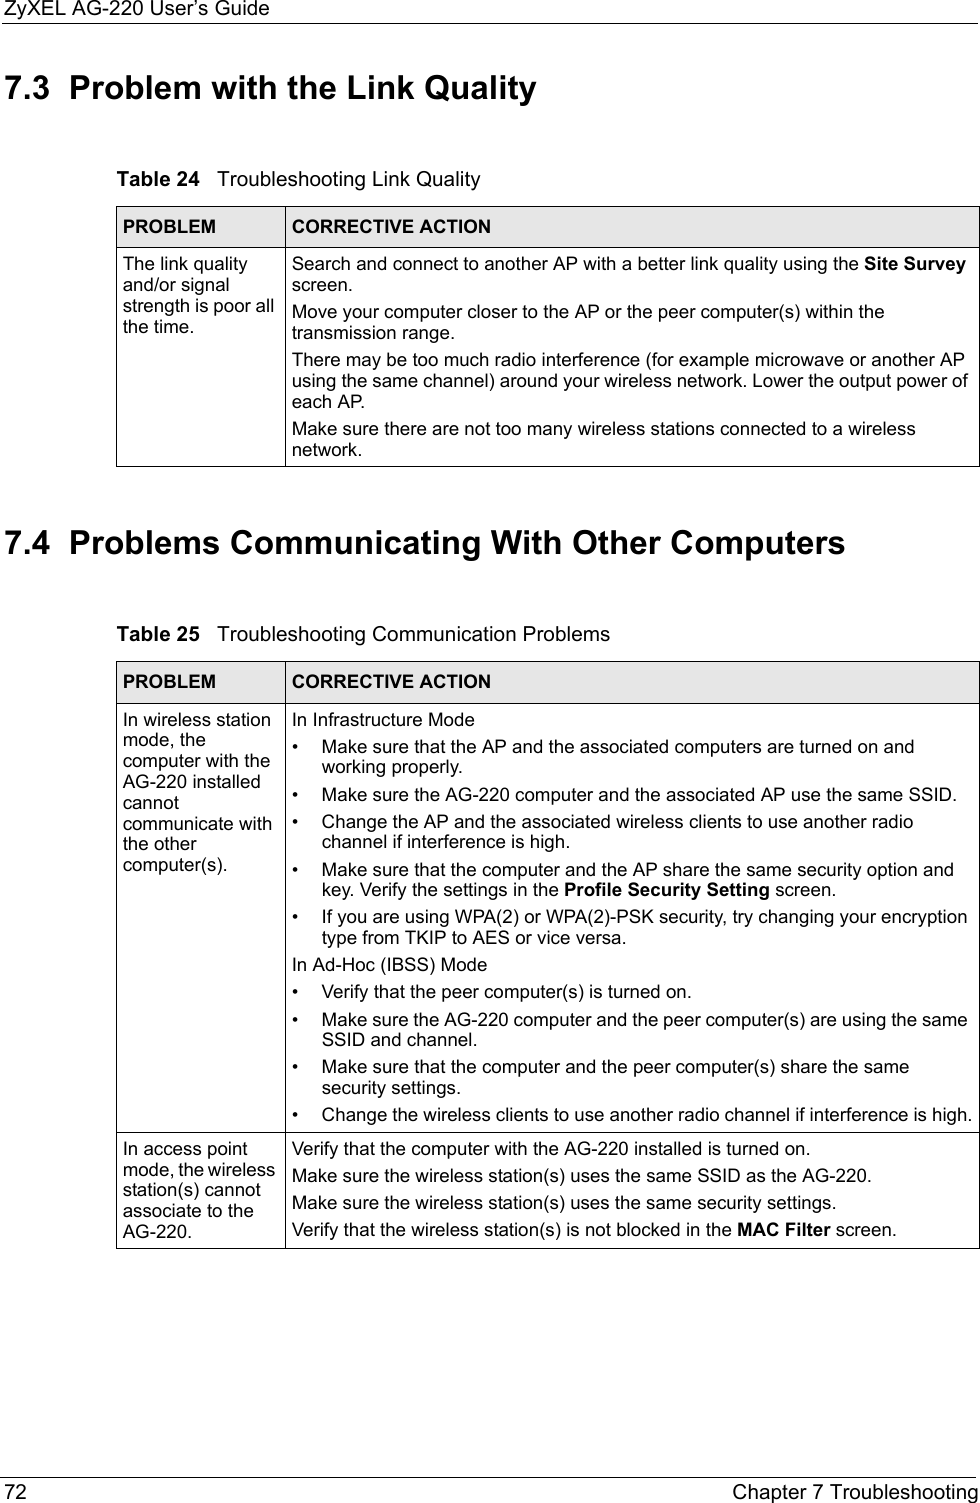 ZyXEL AG-220 User’s Guide72 Chapter 7 Troubleshooting7.3  Problem with the Link Quality7.4  Problems Communicating With Other ComputersTable 24   Troubleshooting Link Quality PROBLEM CORRECTIVE ACTIONThe link quality and/or signal strength is poor all the time.Search and connect to another AP with a better link quality using the Site Survey screen.Move your computer closer to the AP or the peer computer(s) within the transmission range.There may be too much radio interference (for example microwave or another AP using the same channel) around your wireless network. Lower the output power of each AP.Make sure there are not too many wireless stations connected to a wireless network.Table 25   Troubleshooting Communication Problems PROBLEM CORRECTIVE ACTIONIn wireless station mode, the computer with the AG-220 installed cannot communicate with the other computer(s).In Infrastructure Mode• Make sure that the AP and the associated computers are turned on and working properly.  • Make sure the AG-220 computer and the associated AP use the same SSID.• Change the AP and the associated wireless clients to use another radio channel if interference is high.• Make sure that the computer and the AP share the same security option and key. Verify the settings in the Profile Security Setting screen.• If you are using WPA(2) or WPA(2)-PSK security, try changing your encryption type from TKIP to AES or vice versa.In Ad-Hoc (IBSS) Mode• Verify that the peer computer(s) is turned on.• Make sure the AG-220 computer and the peer computer(s) are using the same SSID and channel.• Make sure that the computer and the peer computer(s) share the same security settings.• Change the wireless clients to use another radio channel if interference is high.In access point mode, the wireless station(s) cannot associate to the AG-220.Verify that the computer with the AG-220 installed is turned on.Make sure the wireless station(s) uses the same SSID as the AG-220.Make sure the wireless station(s) uses the same security settings.Verify that the wireless station(s) is not blocked in the MAC Filter screen.